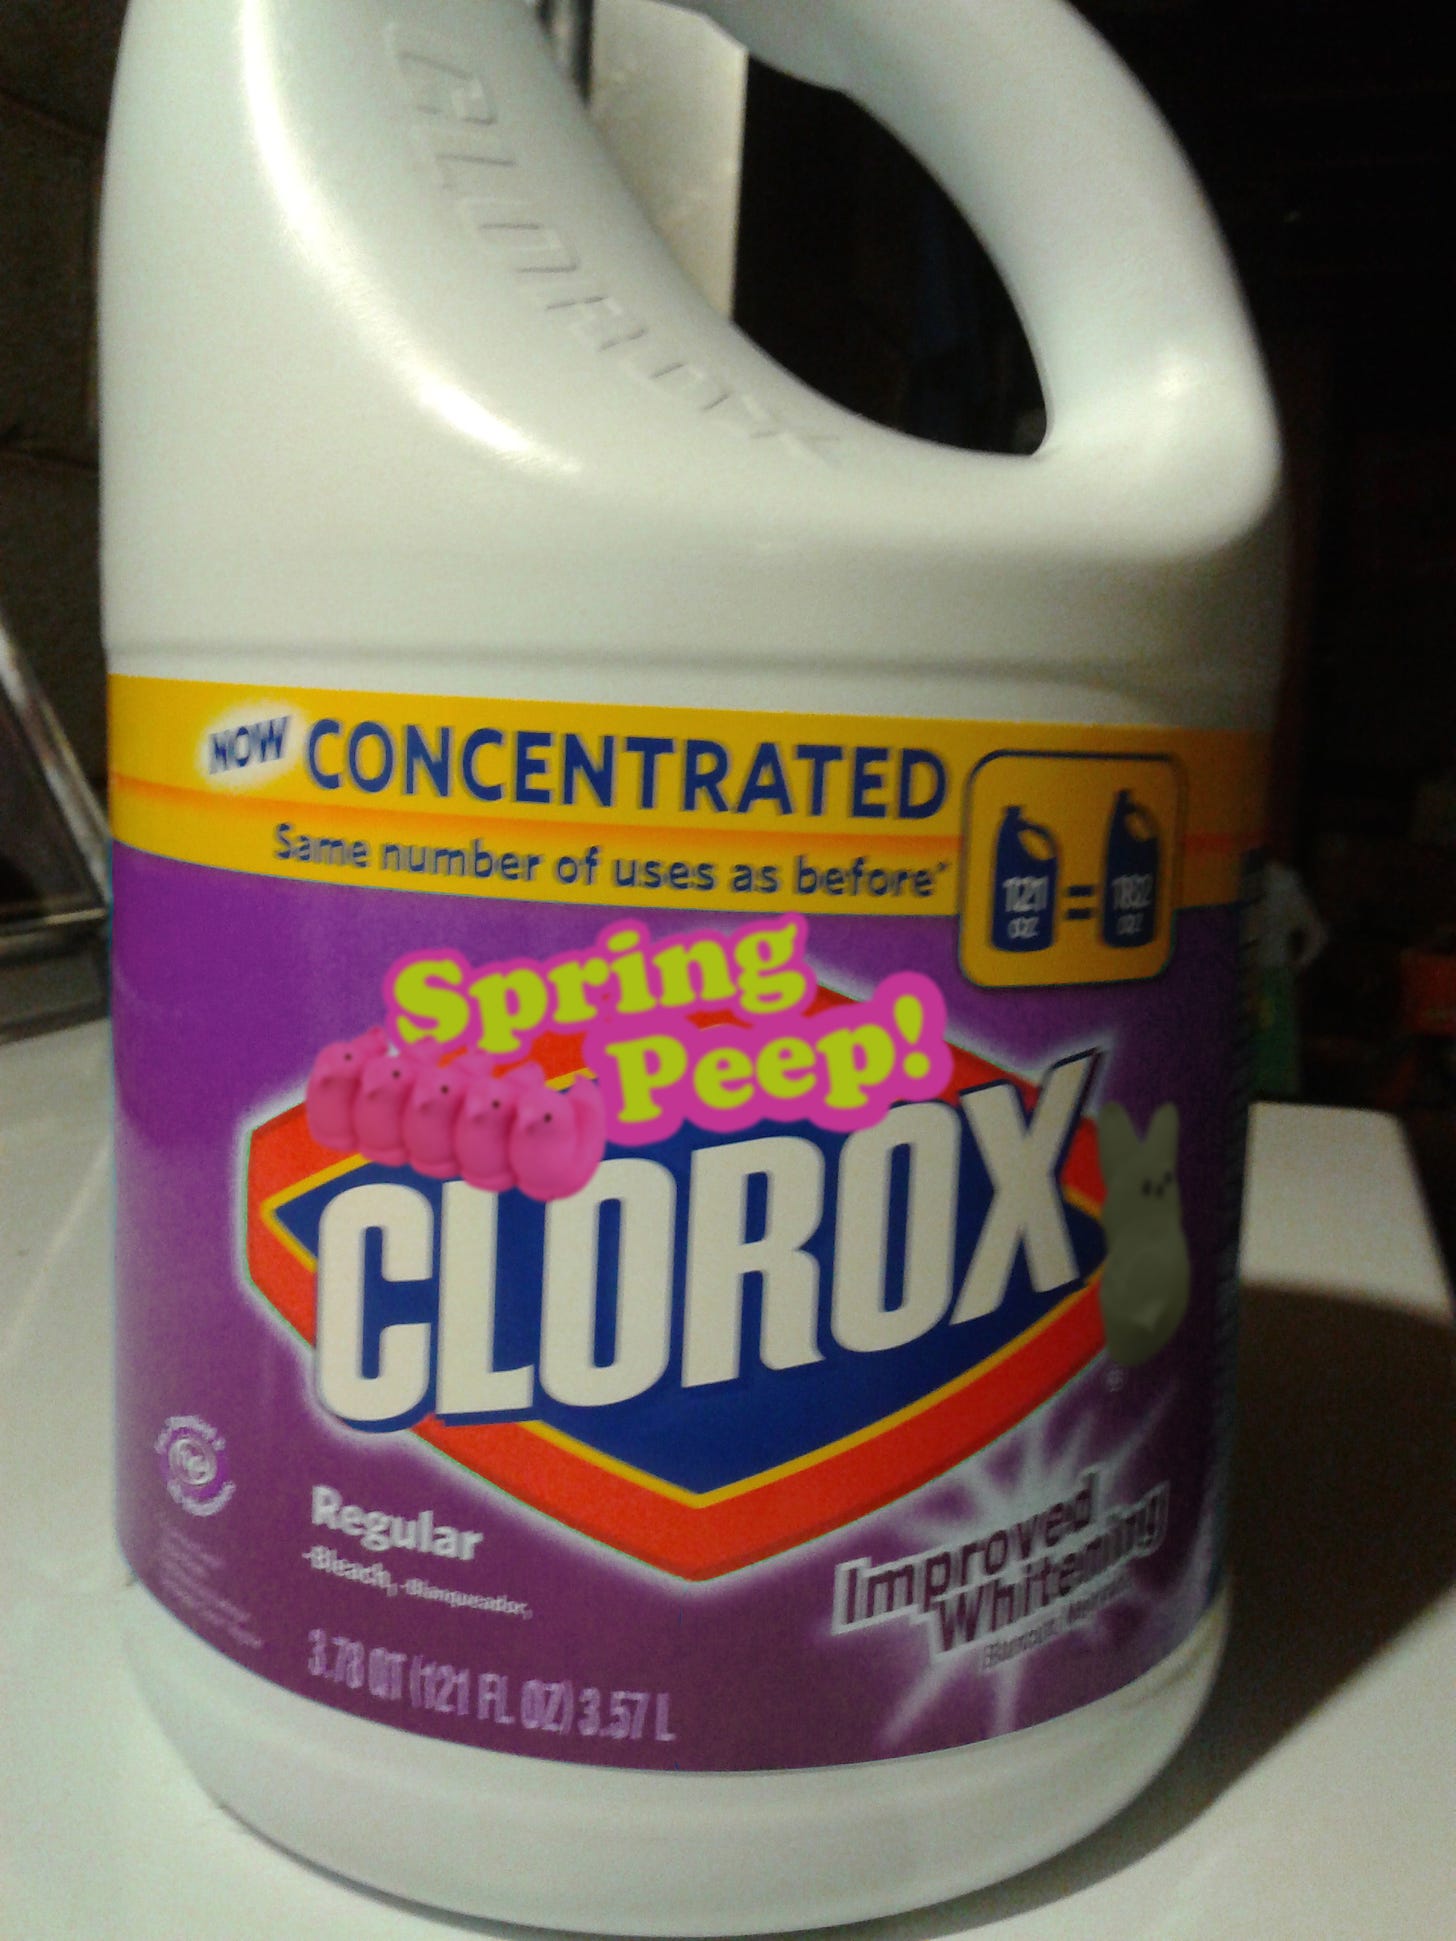 A container of Peep flavored bleach.